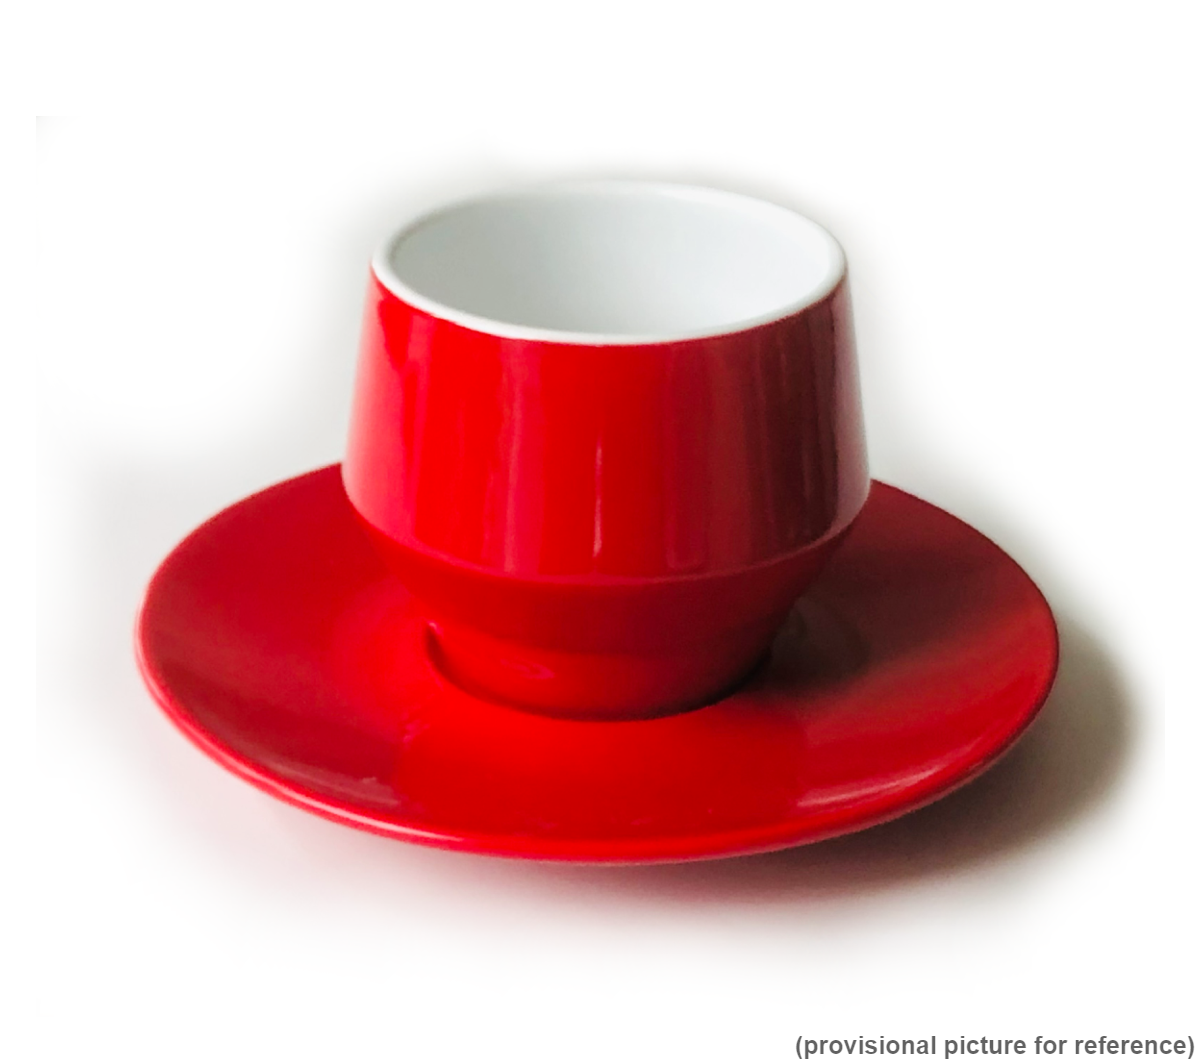 "MANIKO" Double-Walled RED - 70ml Espresso Cups